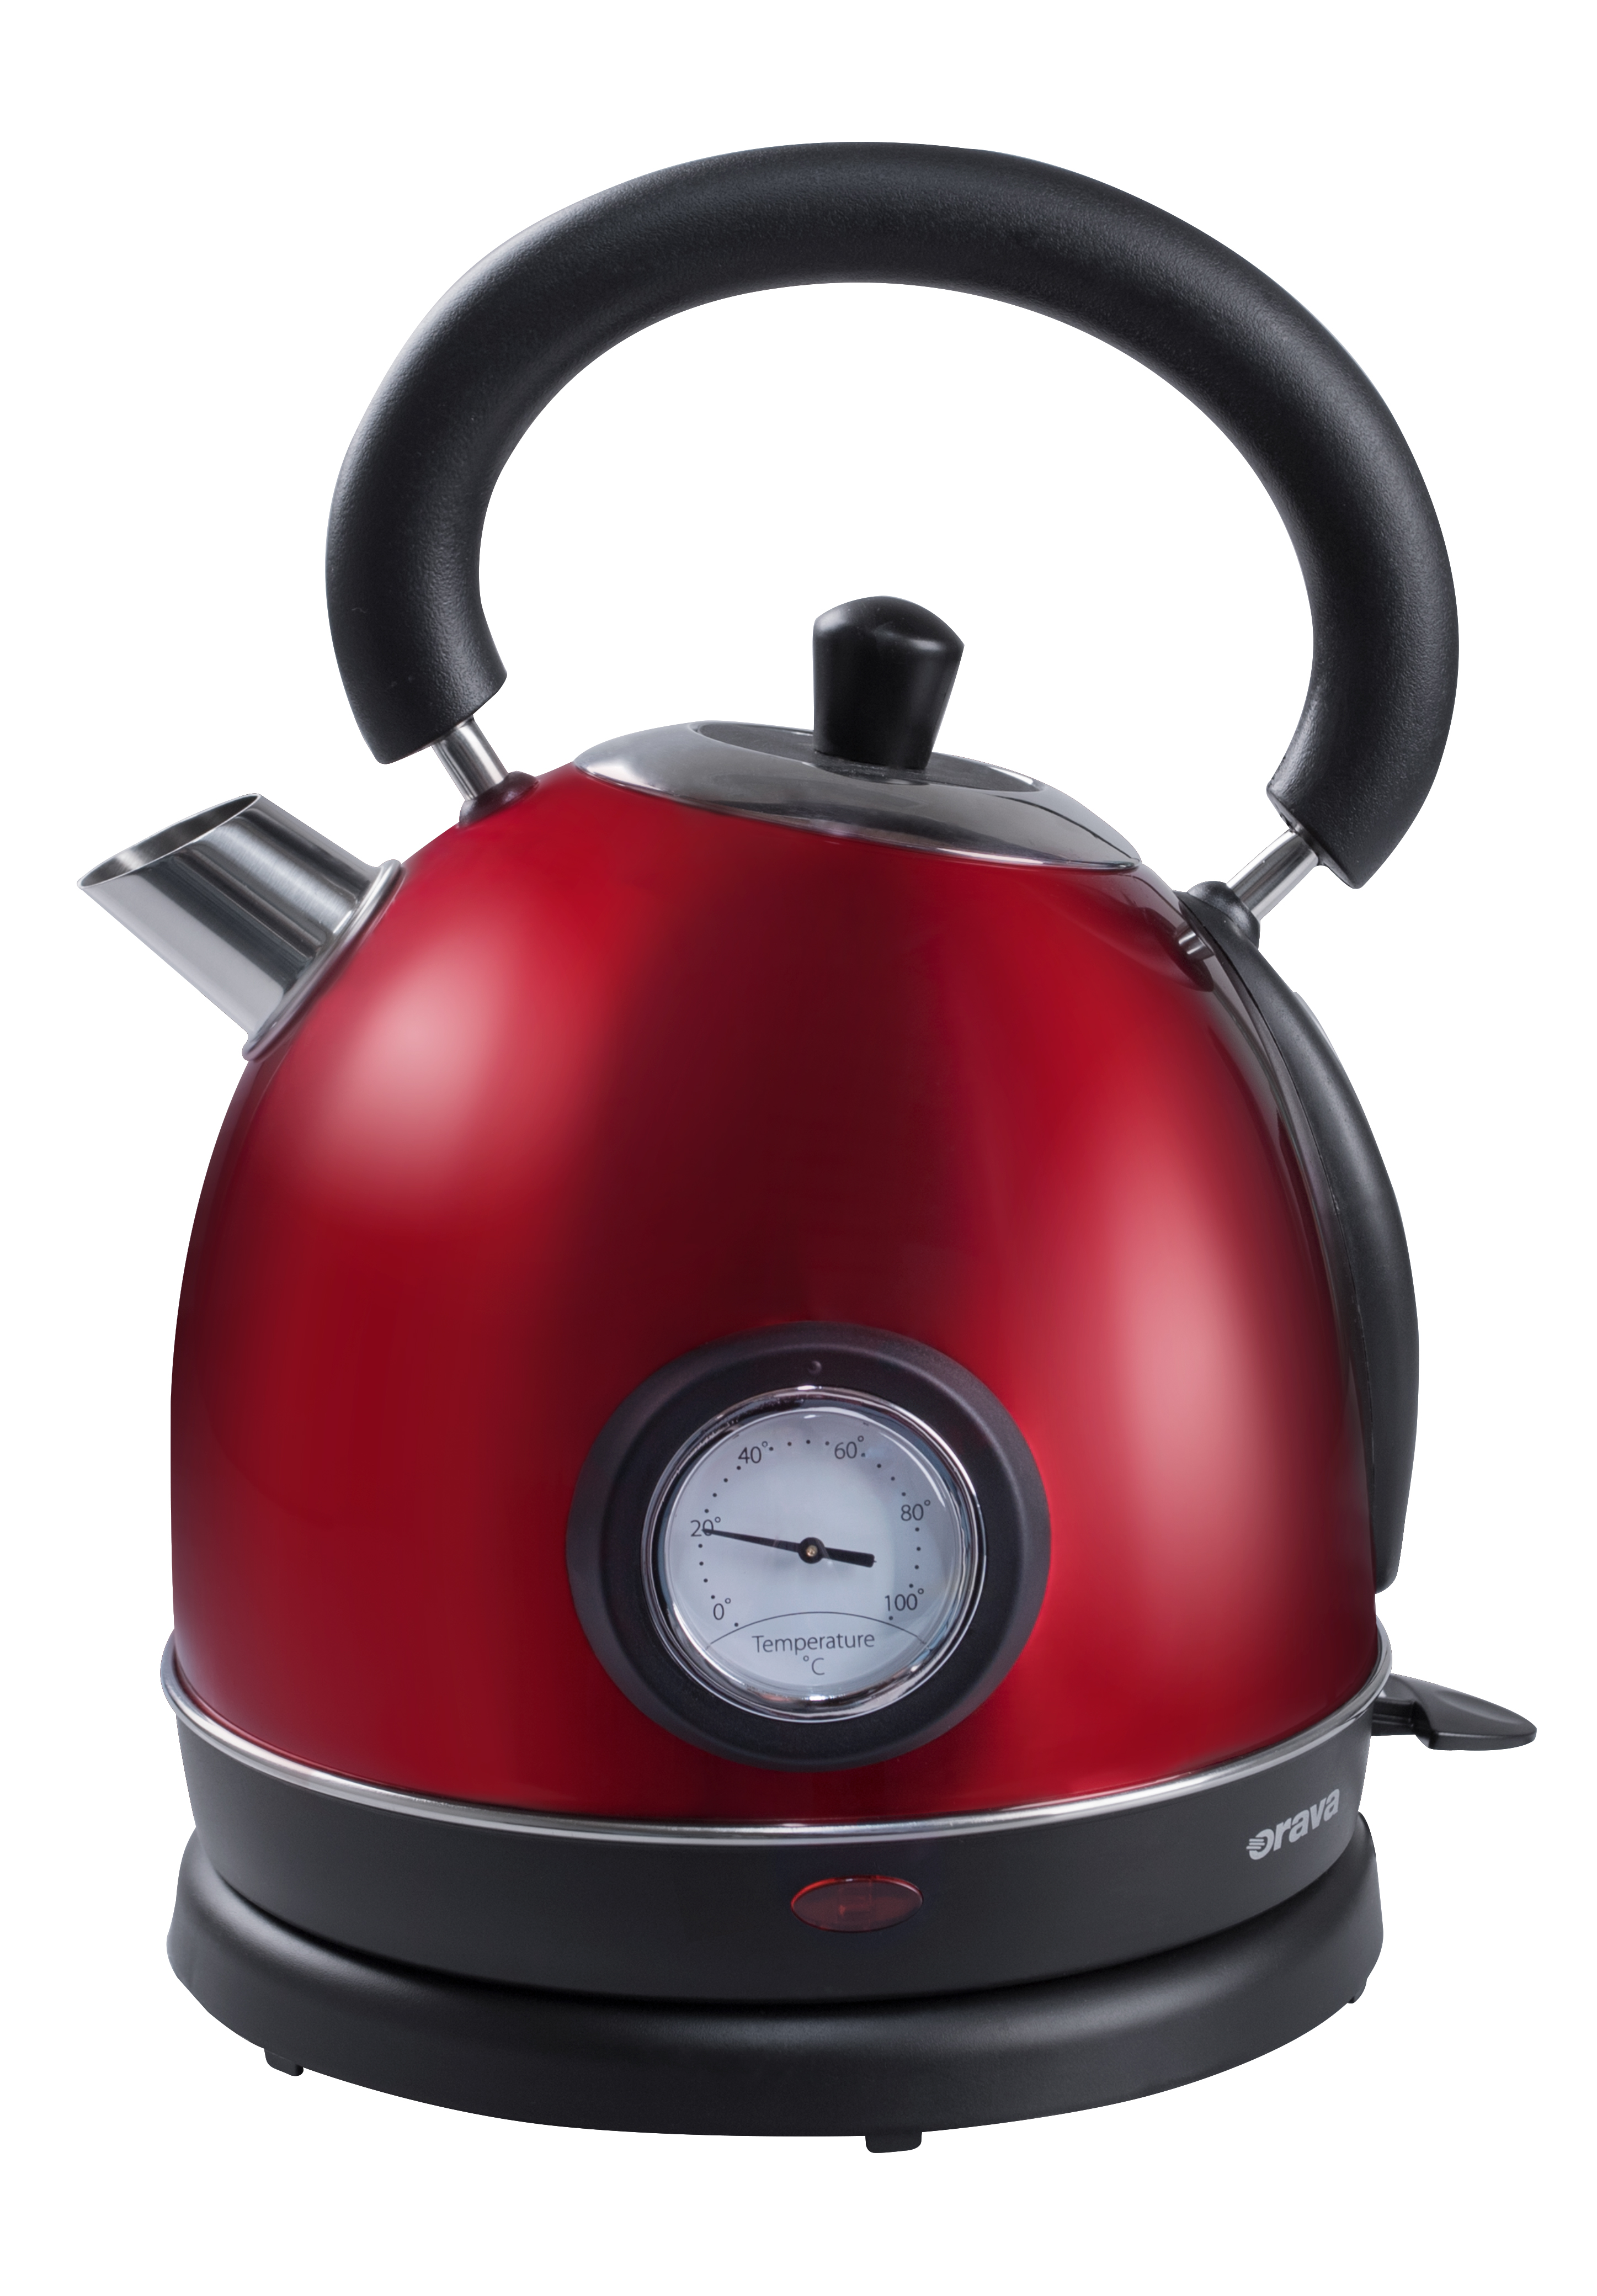 the Orava Hiluxe stainless steel kettle in an attractive red outfit